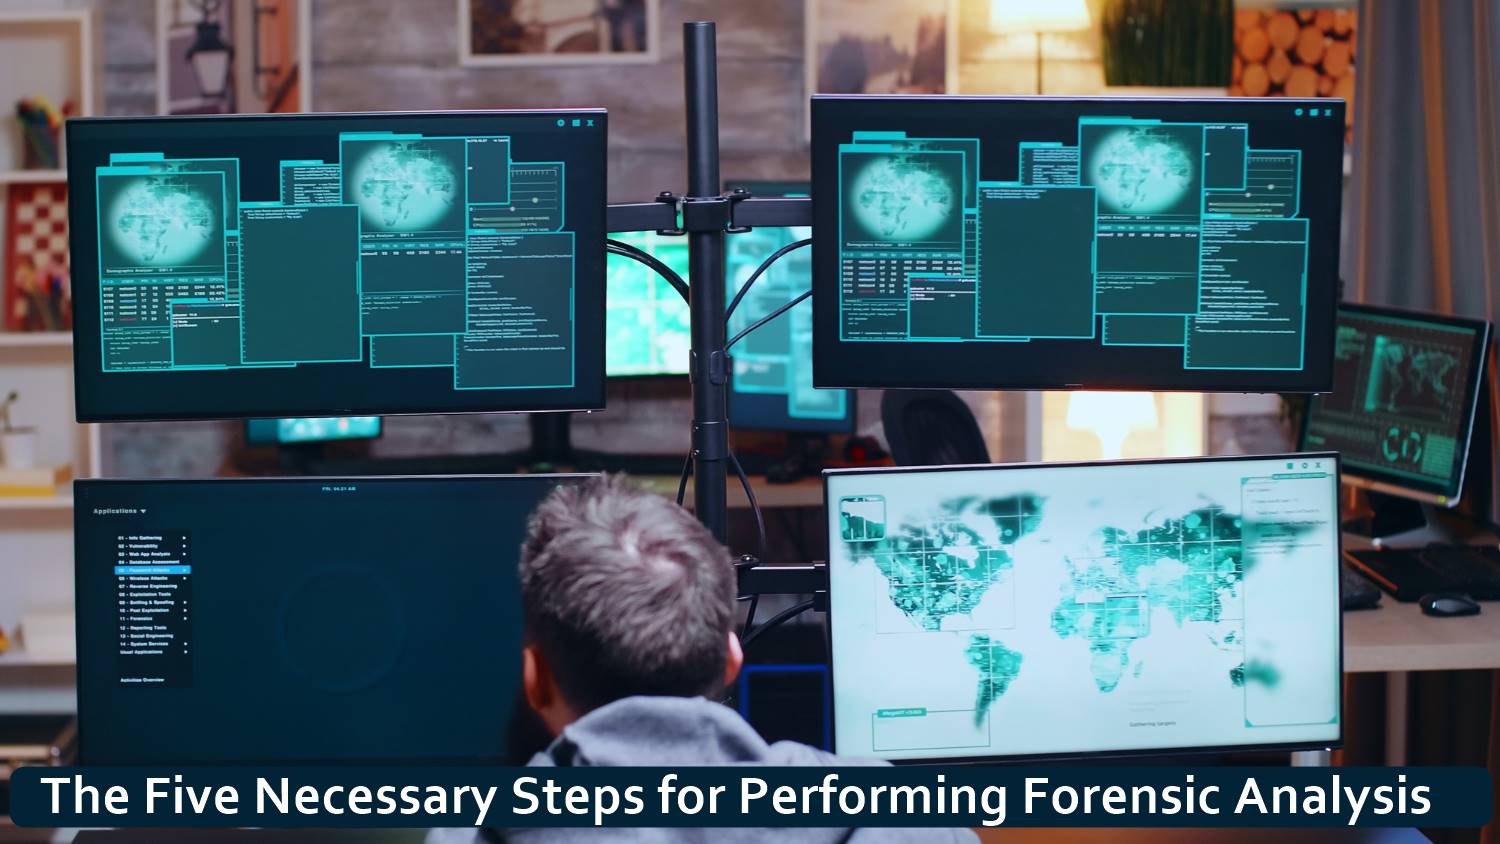 The Five Necessary Steps for Performing Forensic Analysis